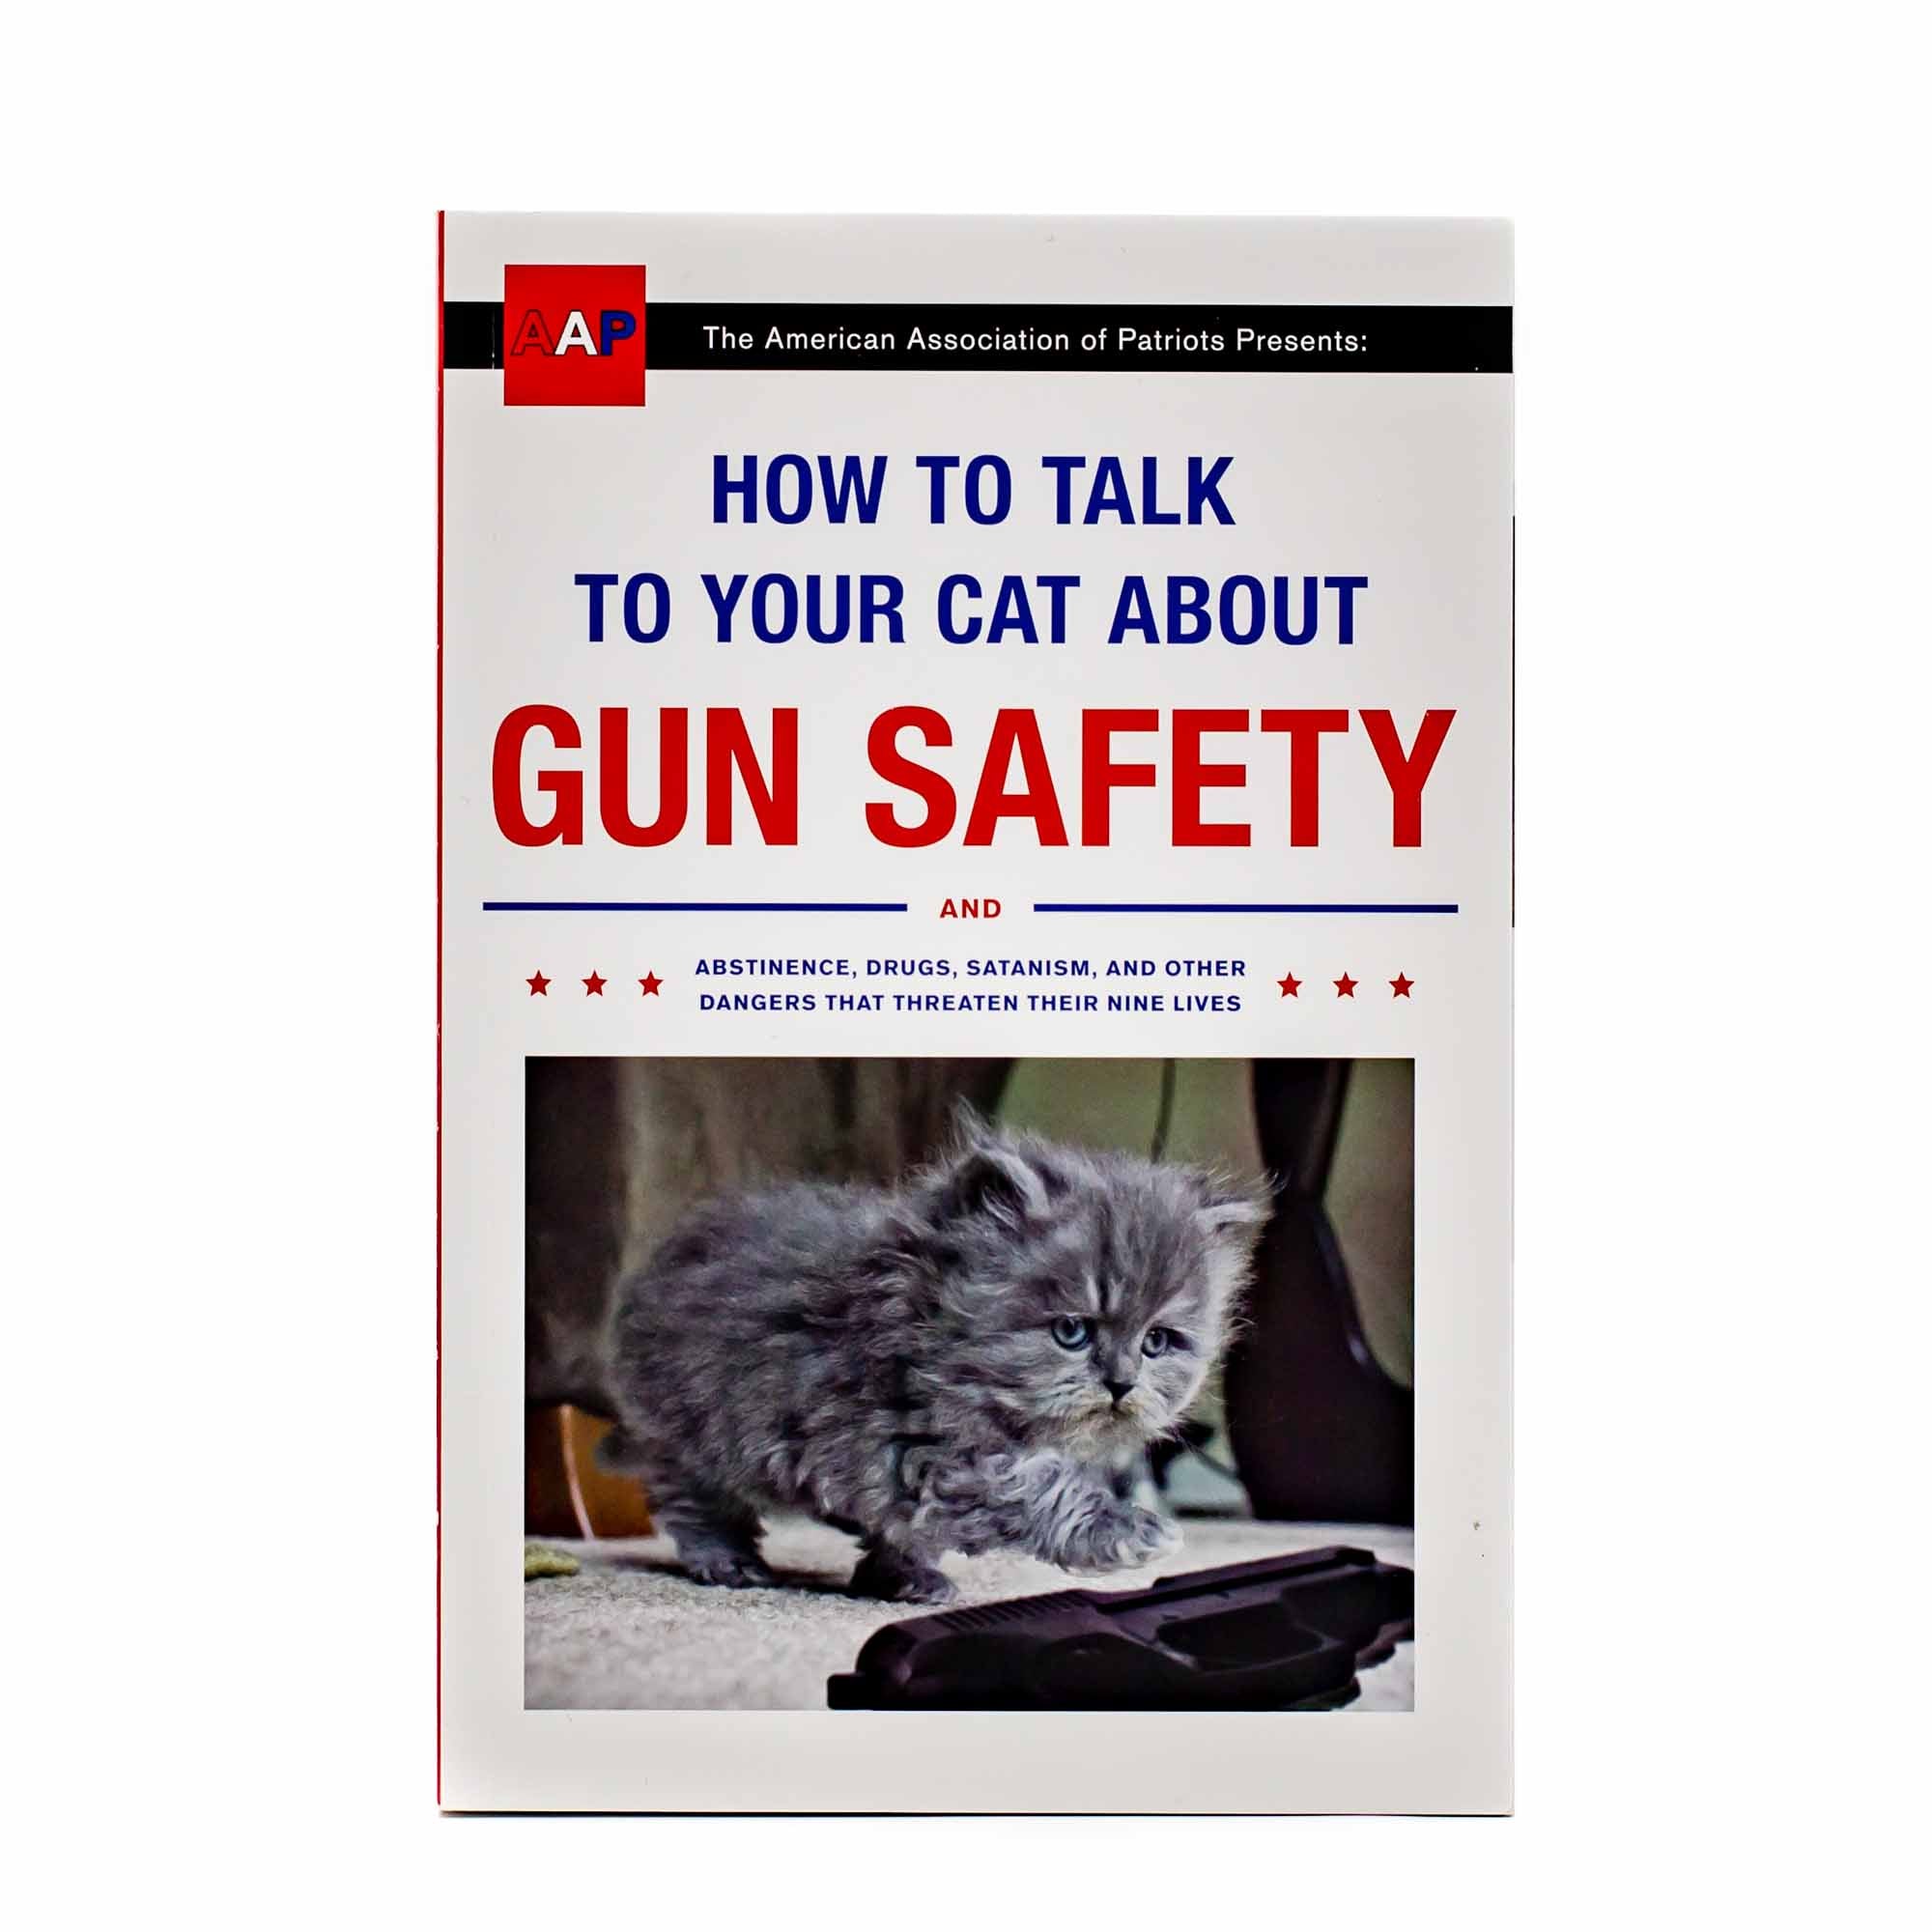 How to Talk to Your Cat About Gun Safety - Mortise And Tenon